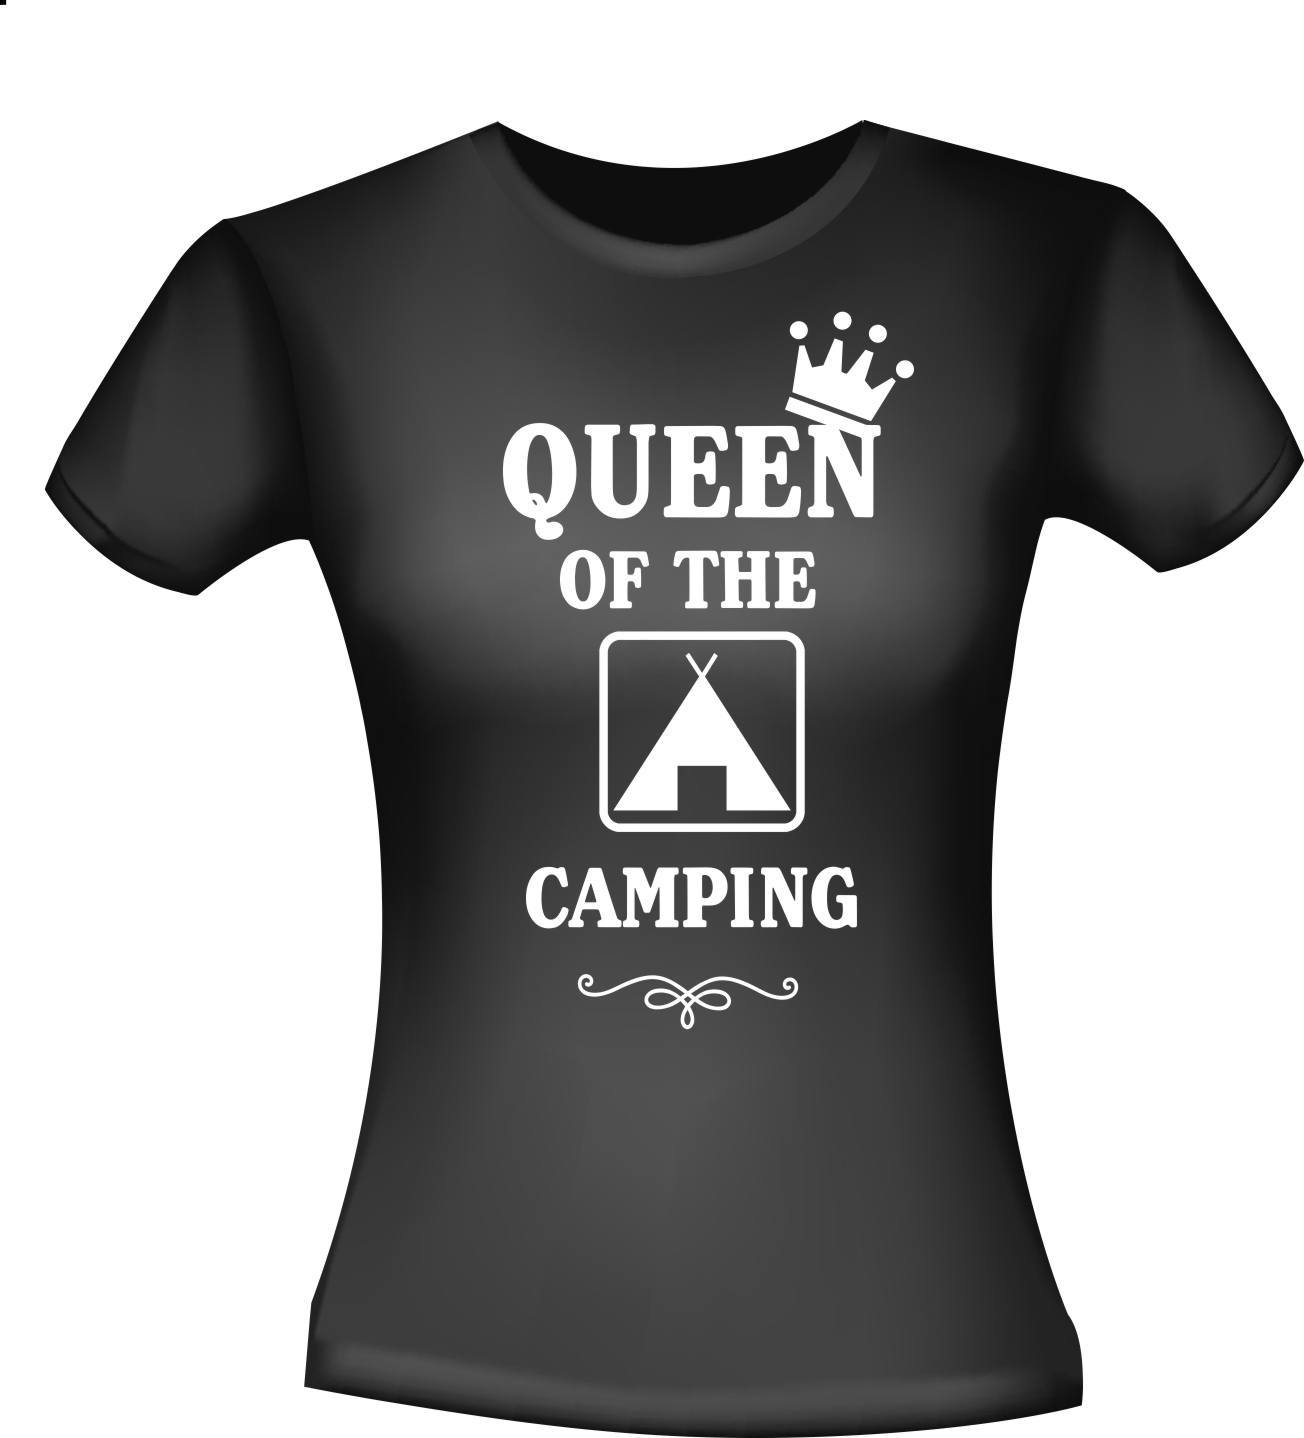 Queen of the camping shirtje Grappig camping shirt T-shirt